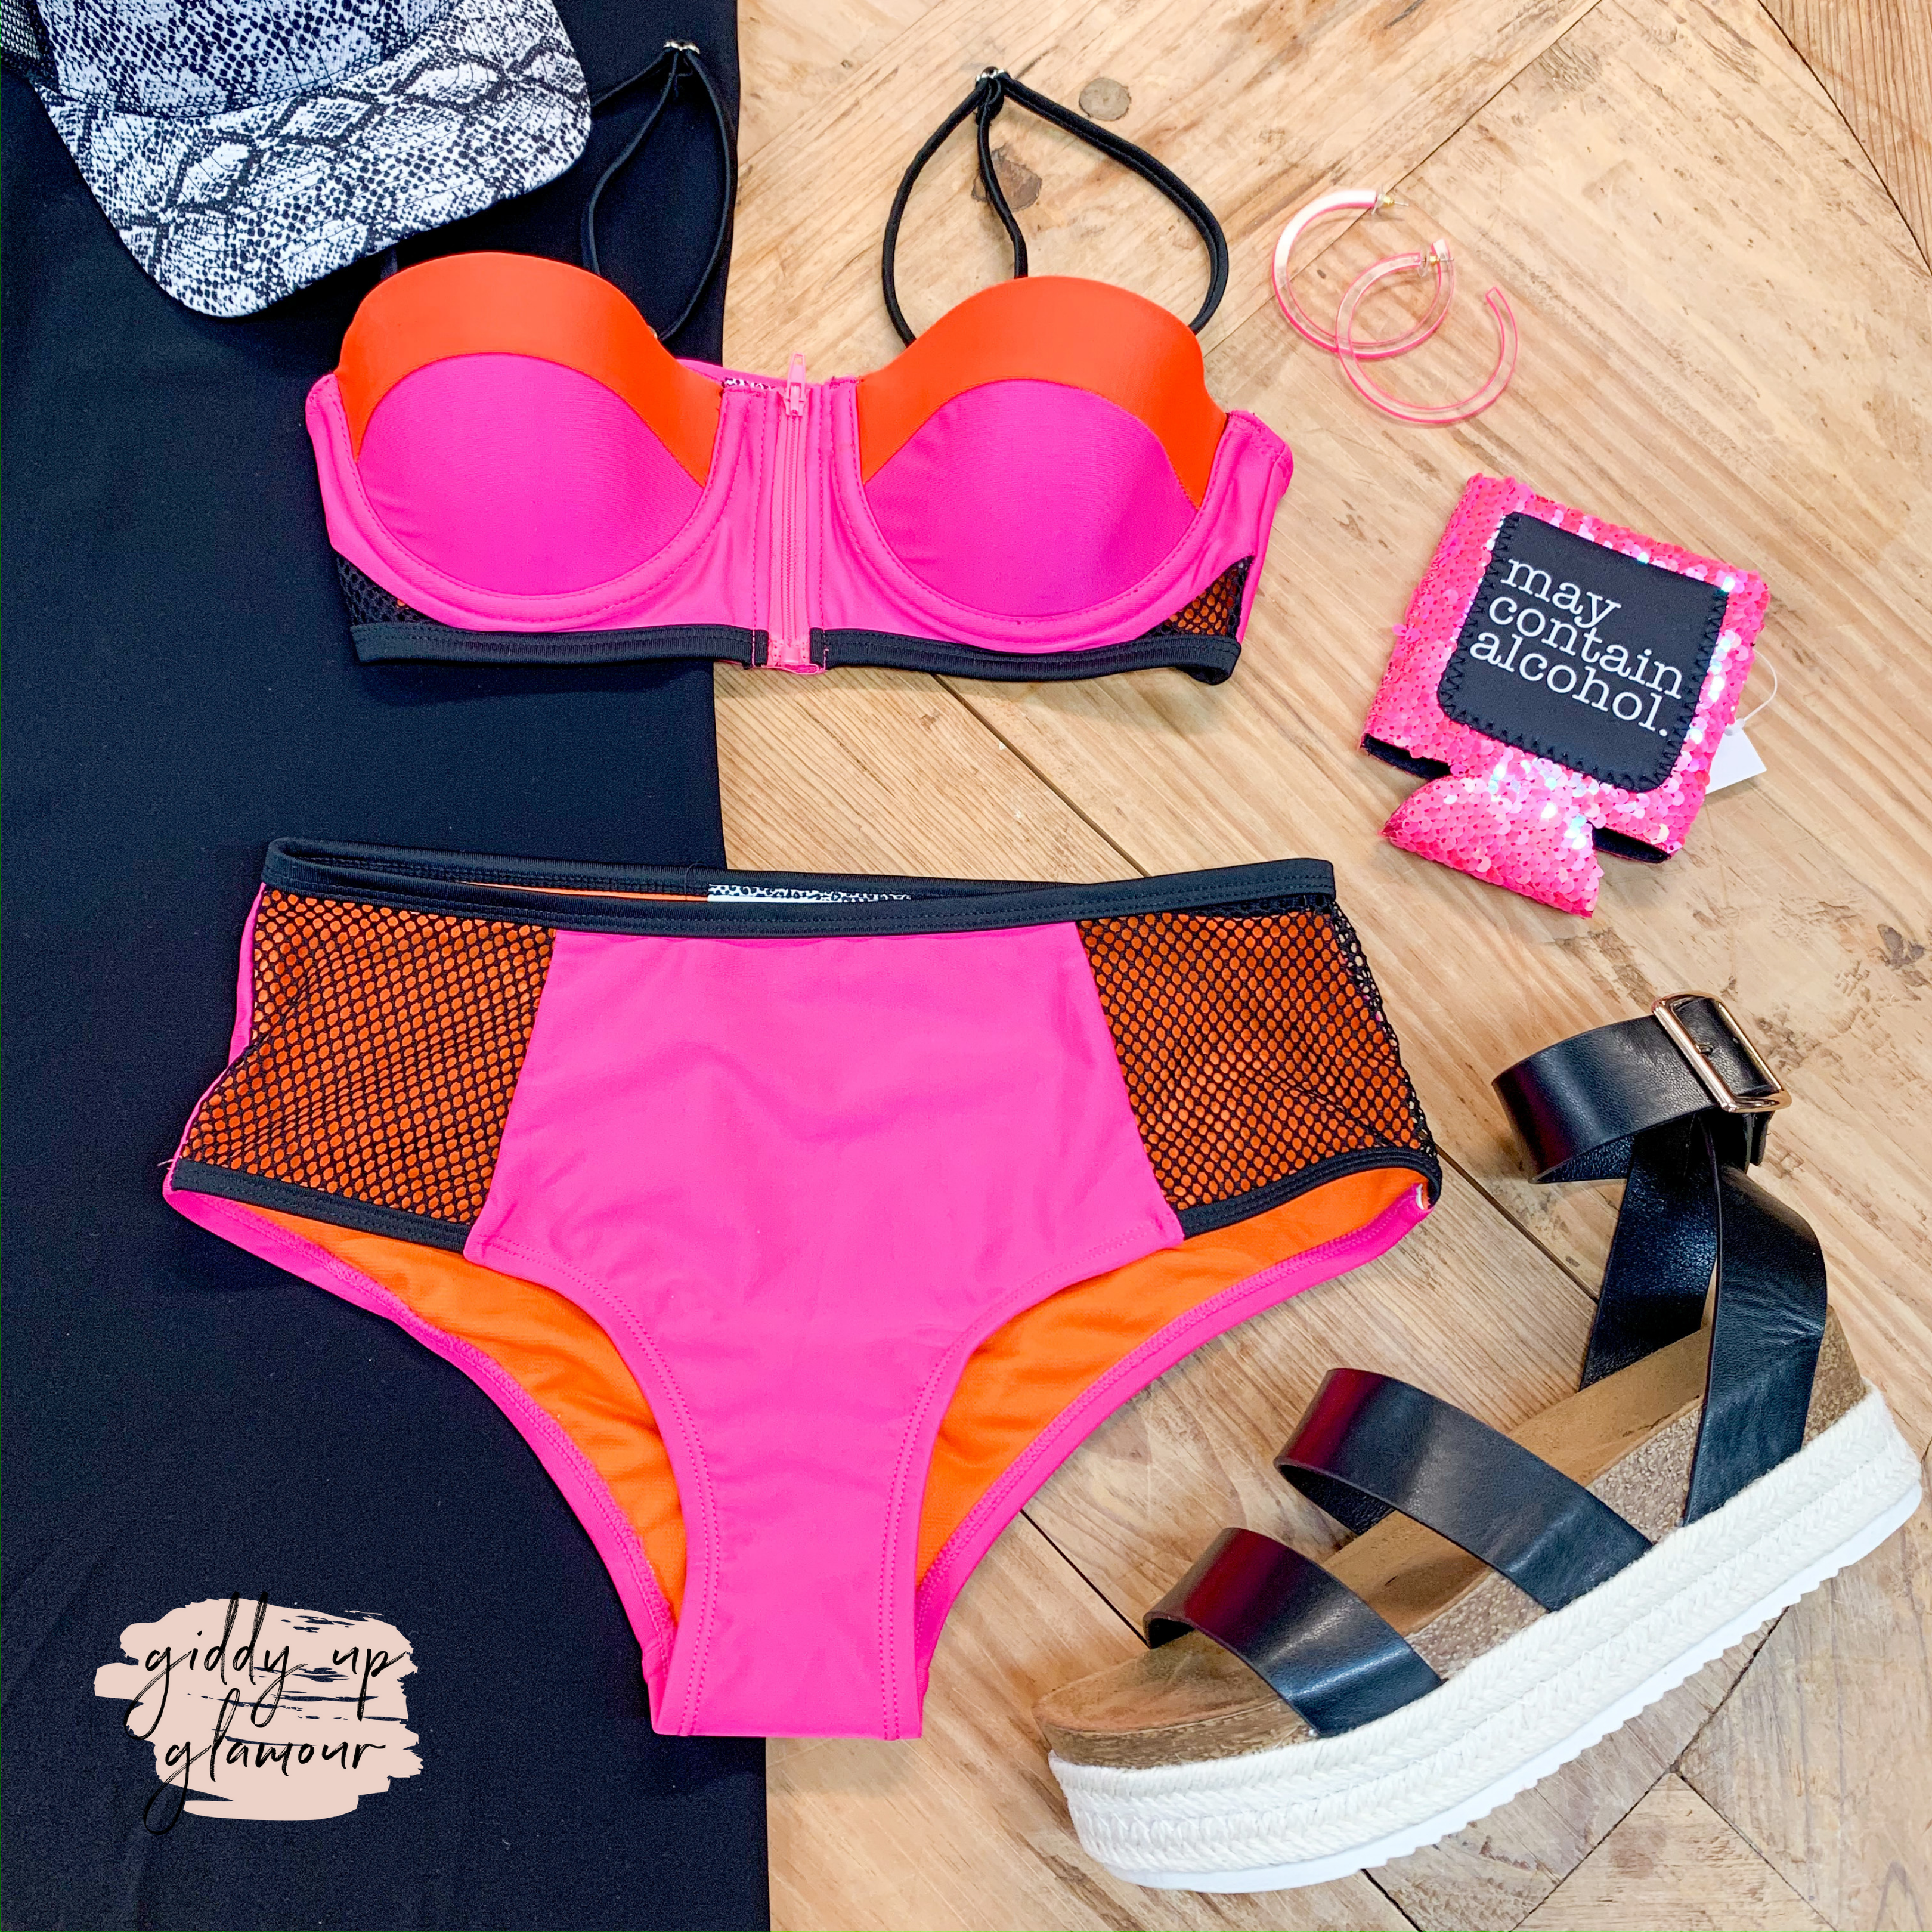 Sun Kissed Color Block Bikini Top with Mesh in Orange and Pink - Giddy Up Glamour Boutique